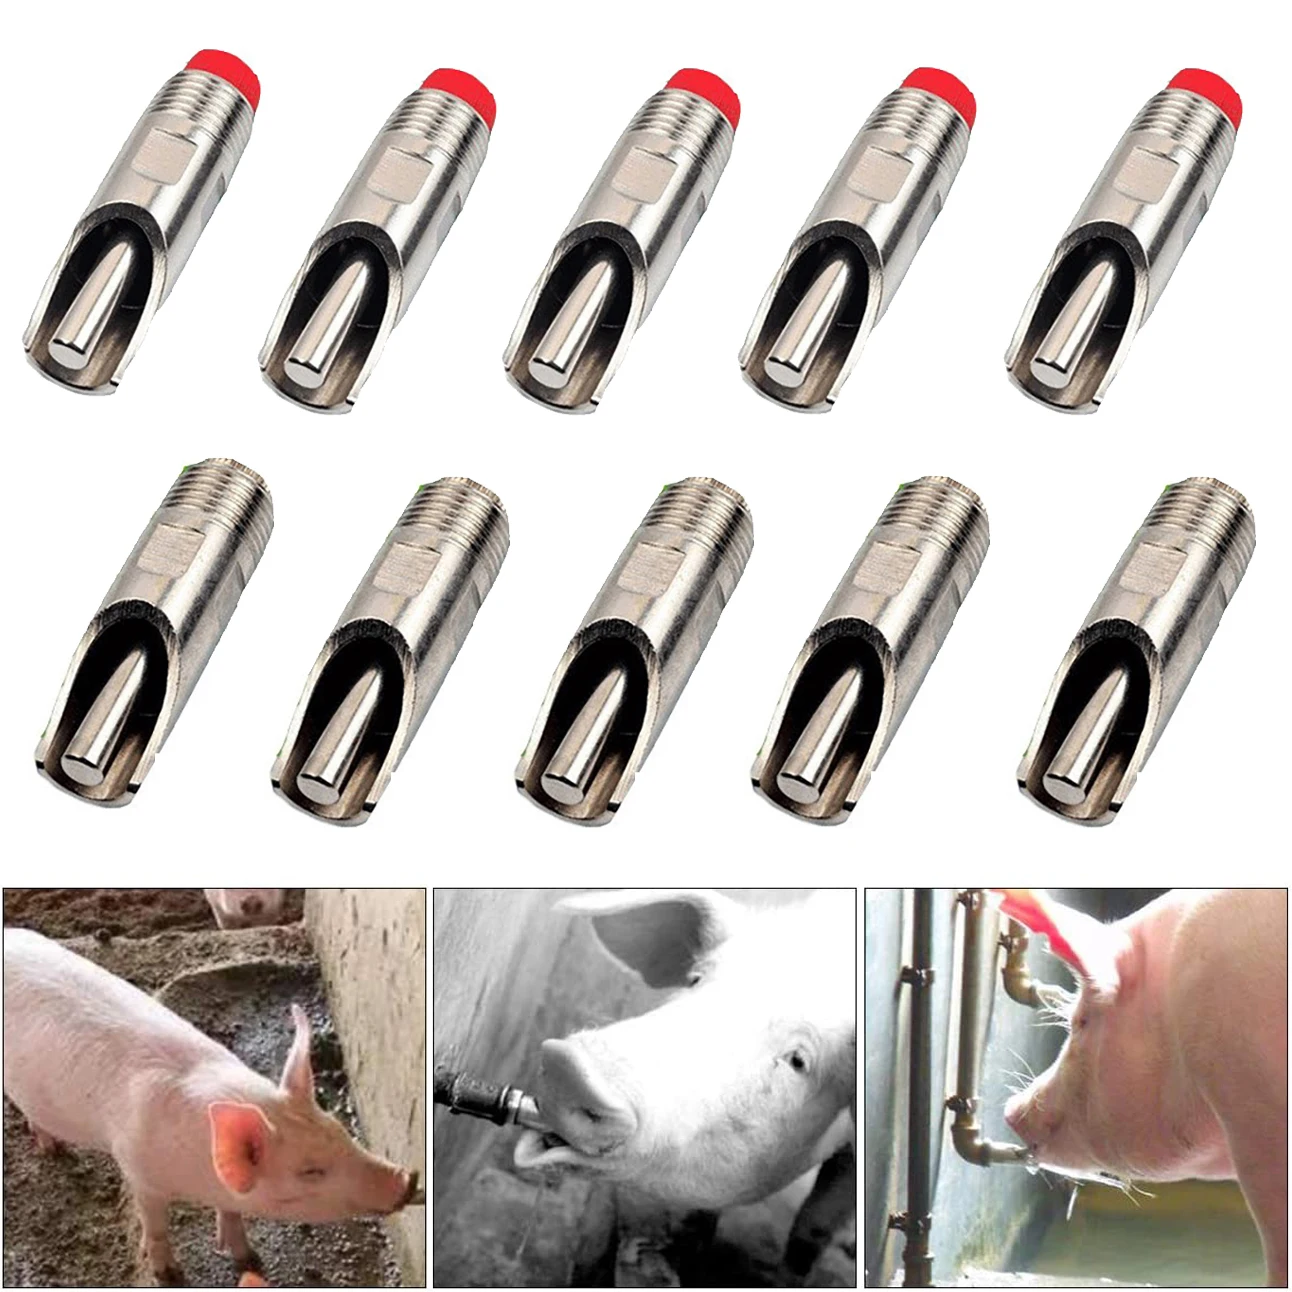 

5Pcs 1/2"" NPT Stainless Steel Automatic Pig Nipple Pig Nipple Waterer Hog Nipple Waterer Drinker Feeder For Piglet Sow Drinking